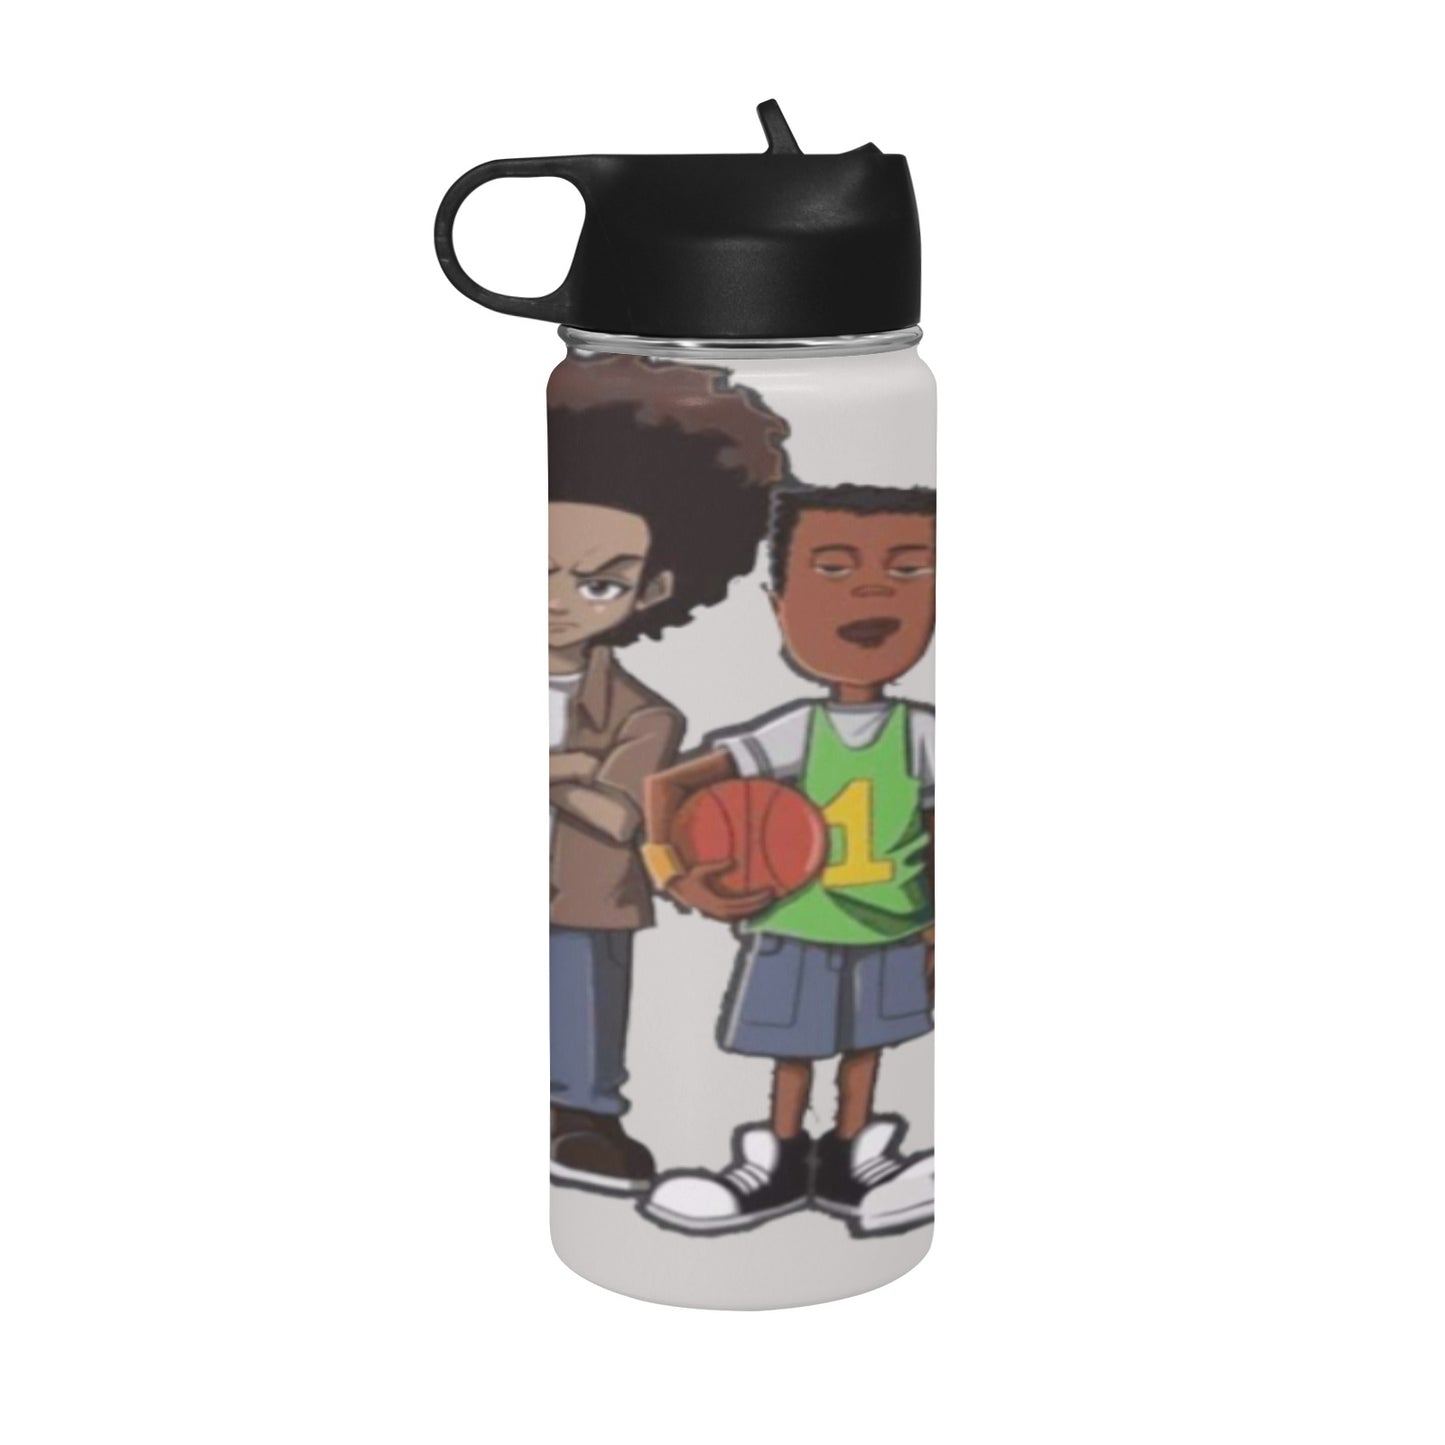 Cartoon Crew Insulated Water Bottle with Straw Lid (18 oz)